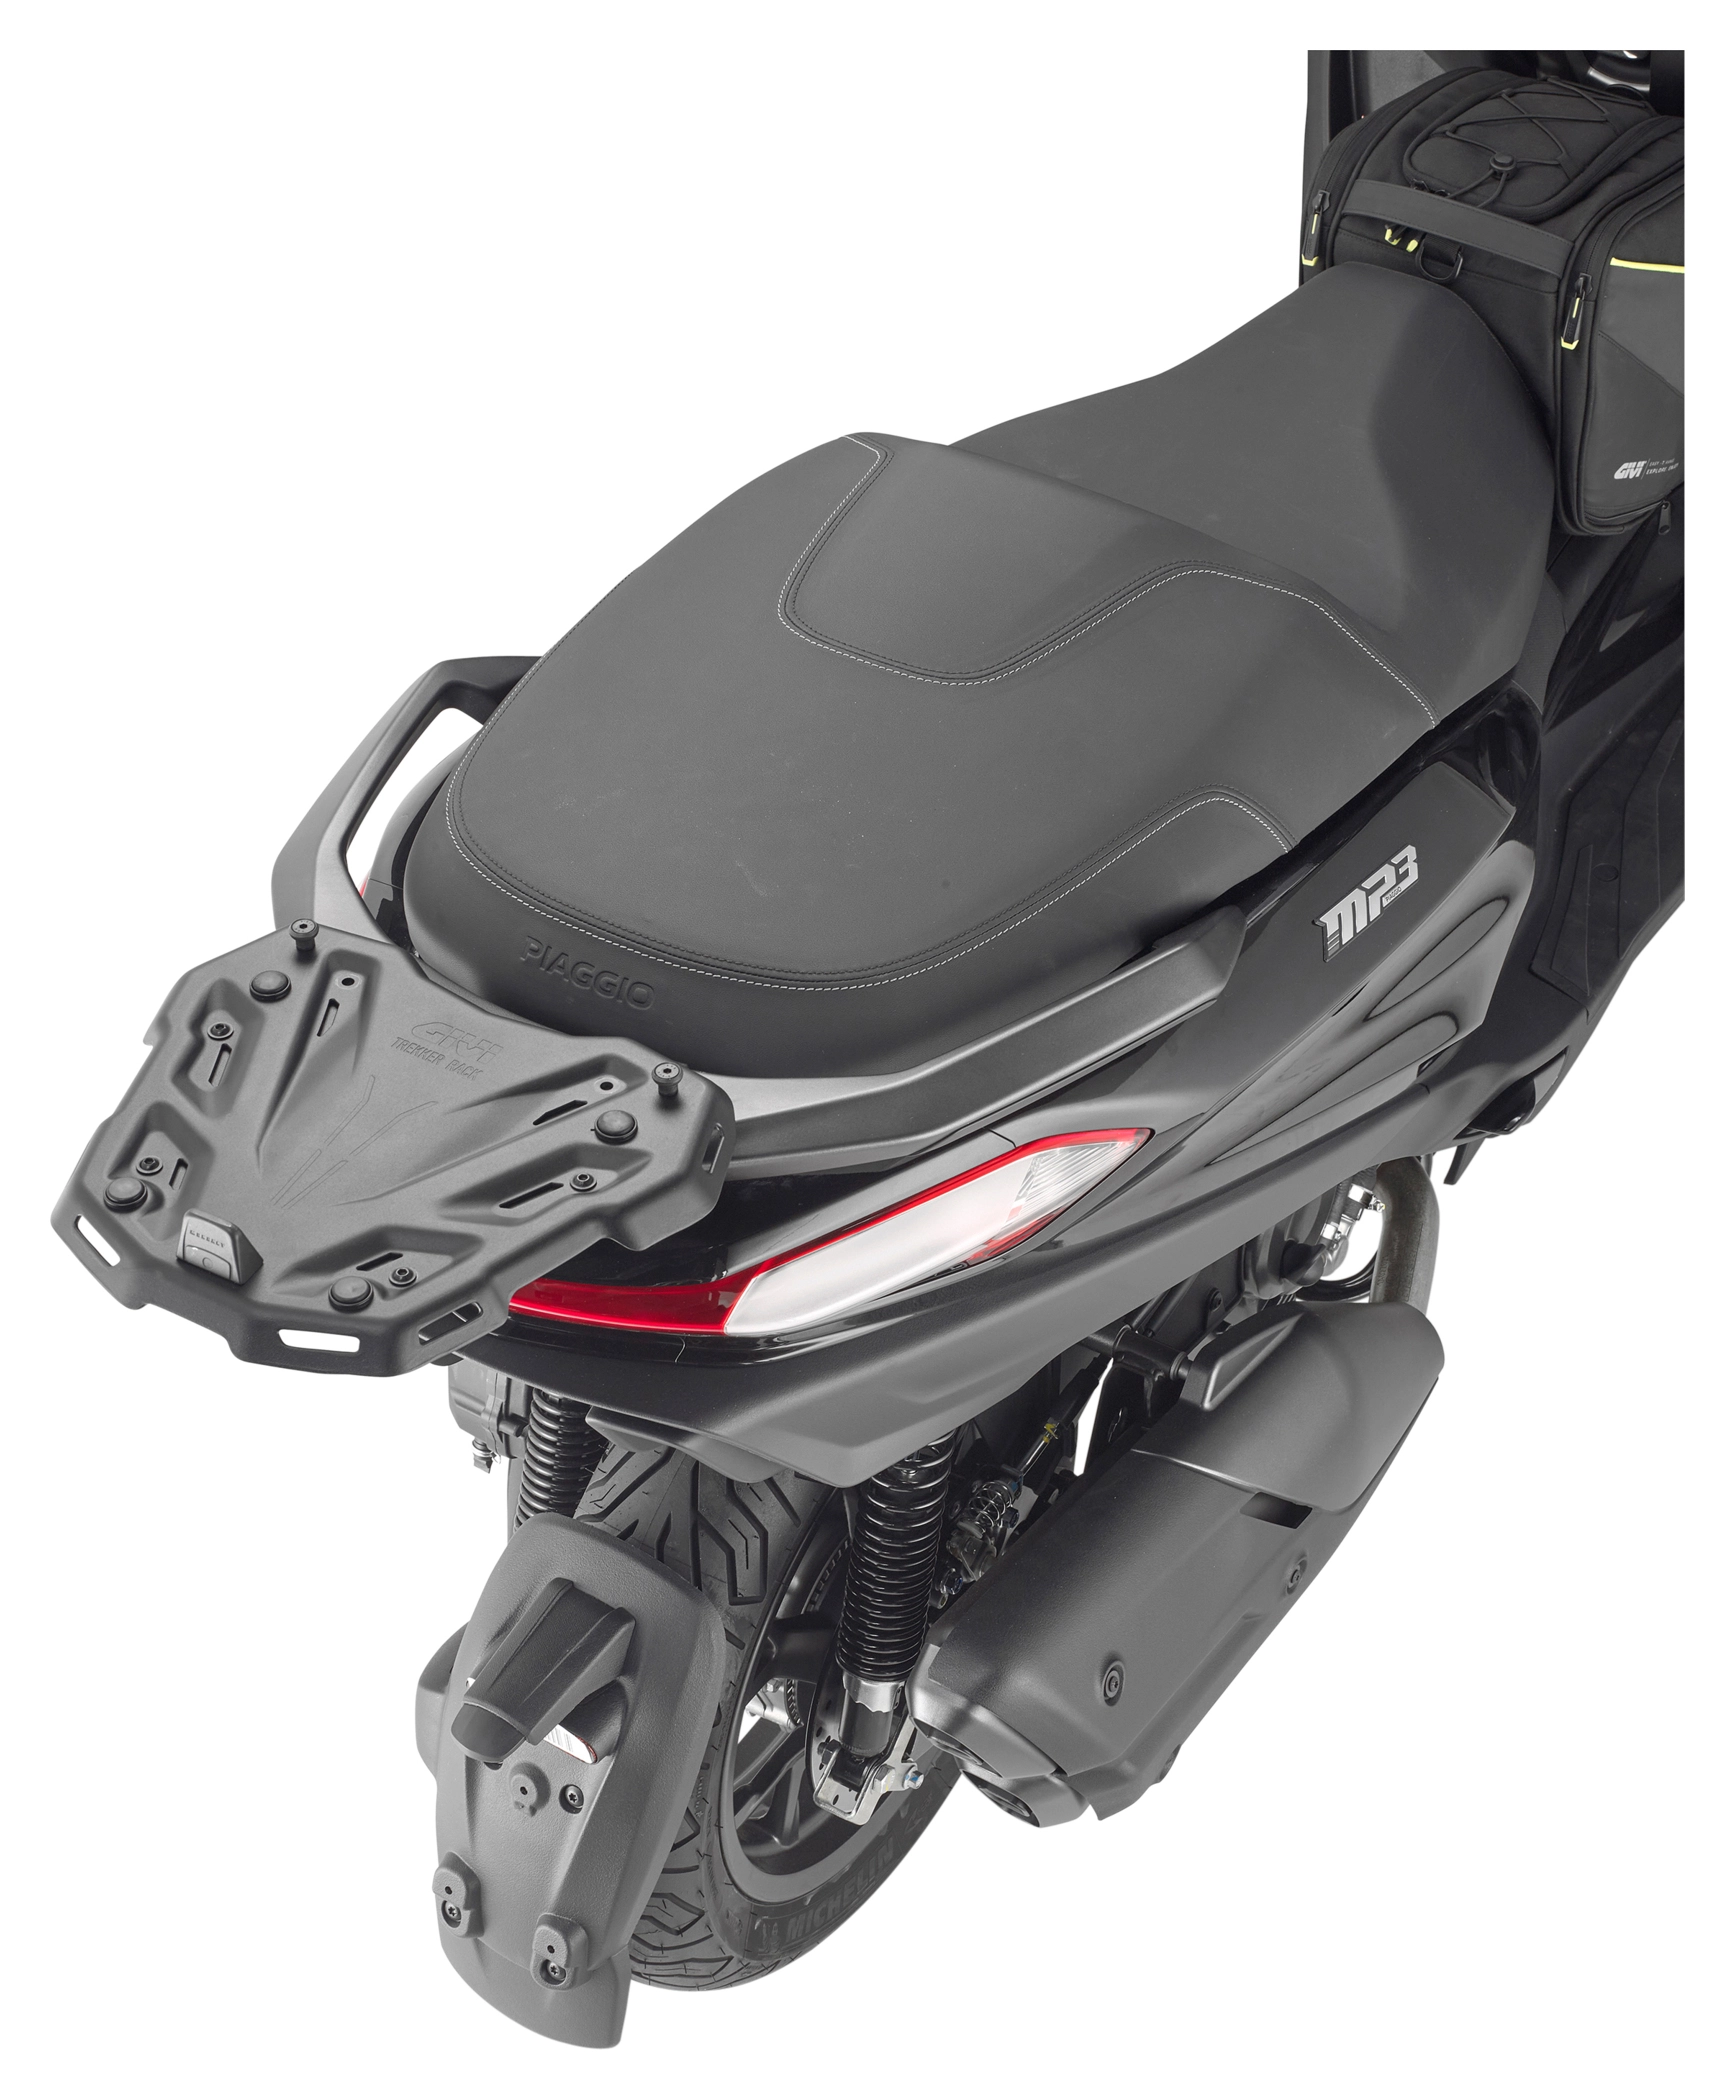 Givi Topcase-Carrier for Scooter